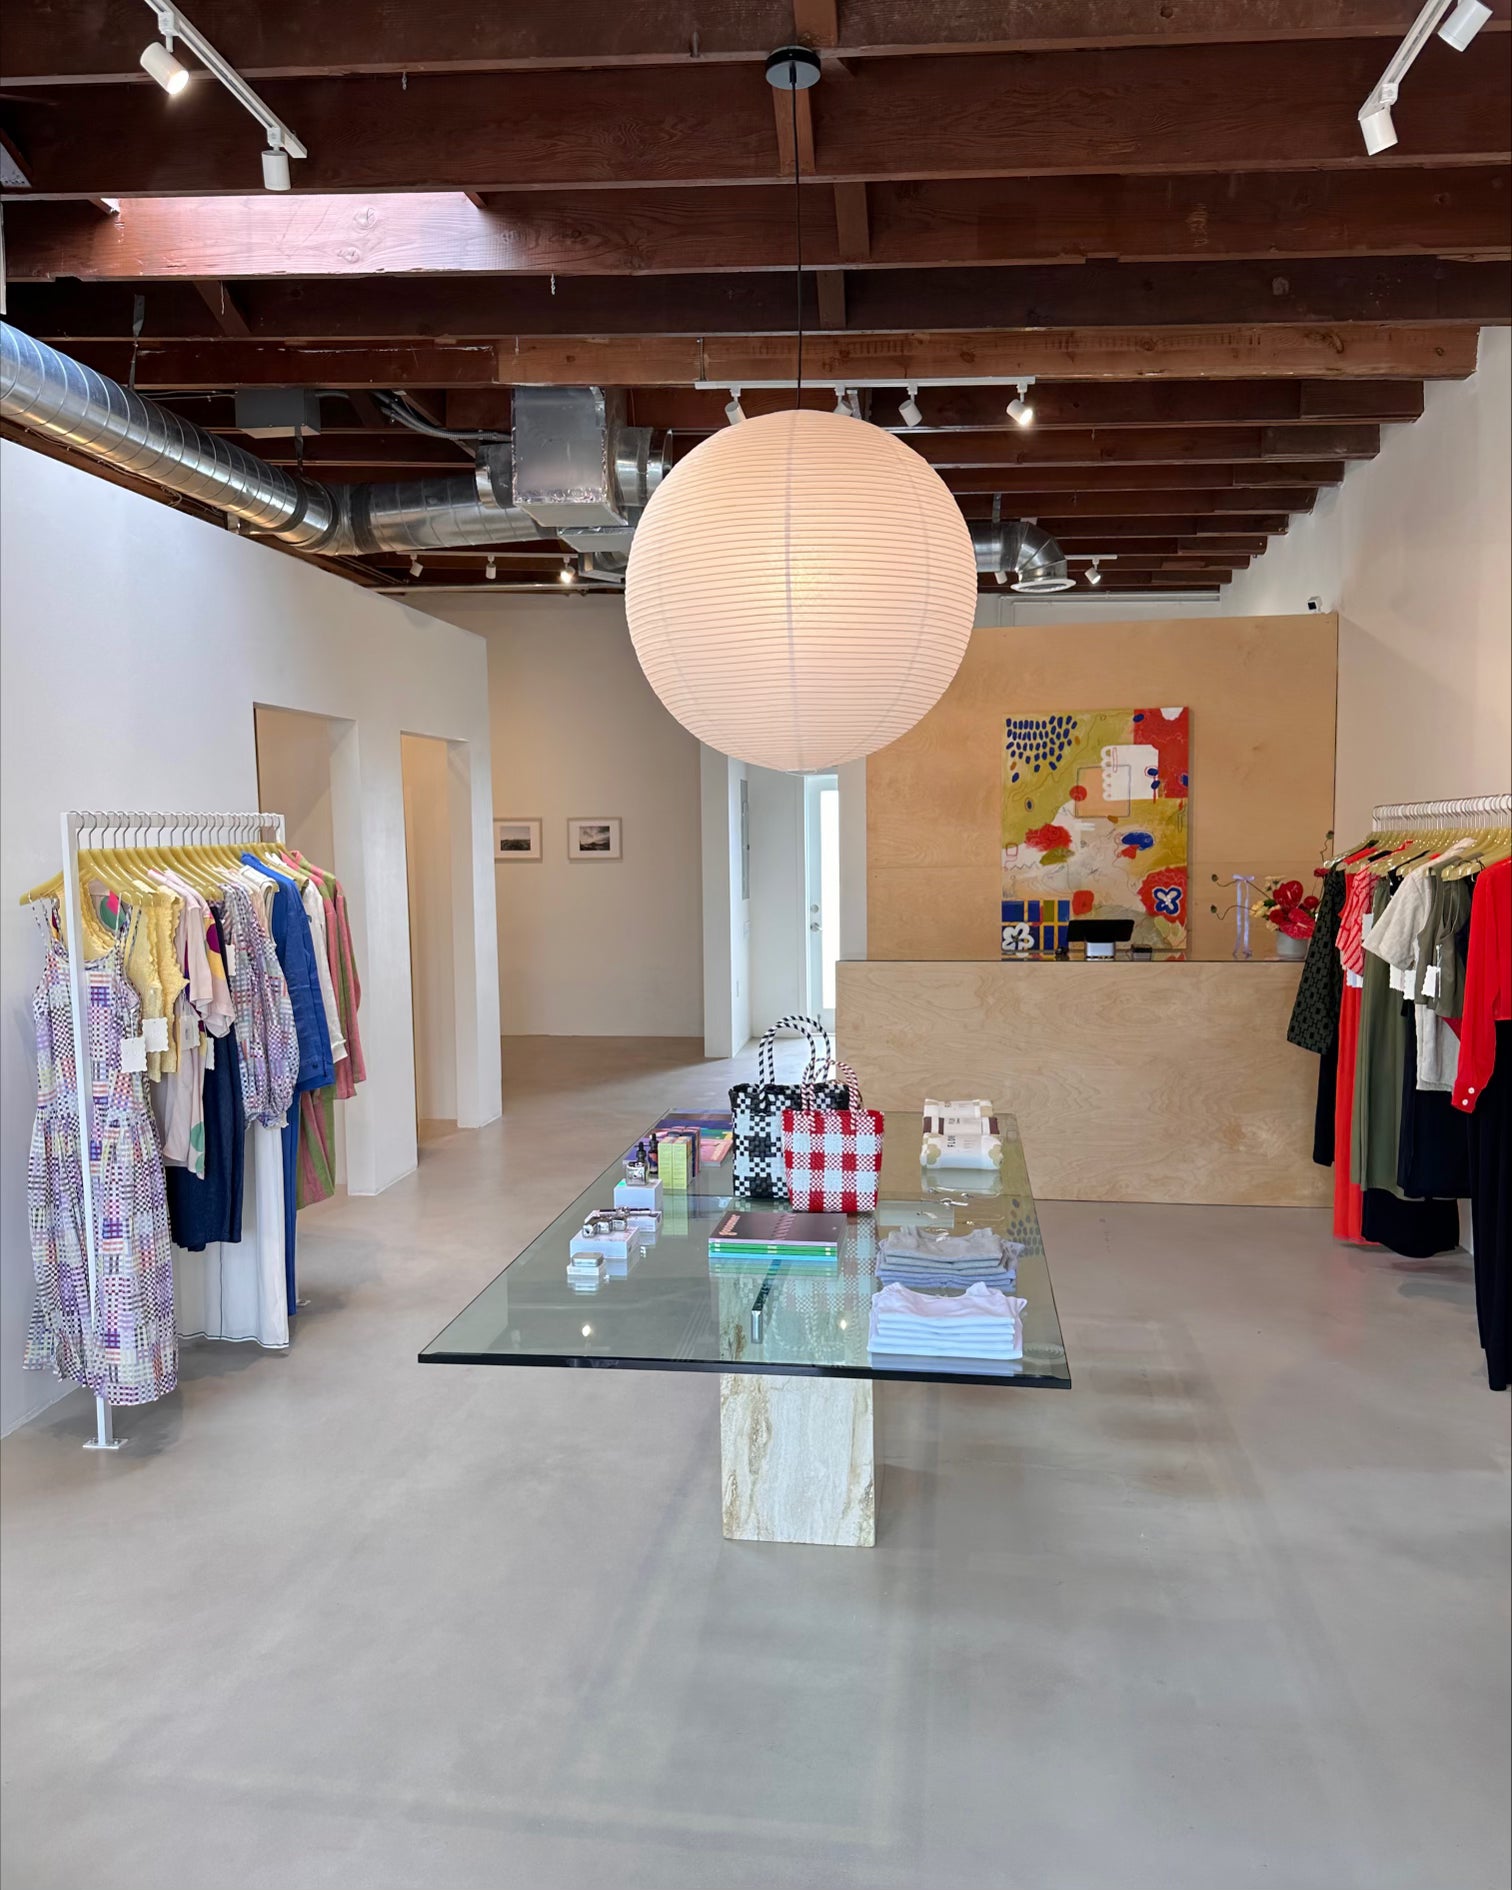 storefront with large glass travertine table and a large paper lantern pendant light surrounded by brightly colored clothes on racks